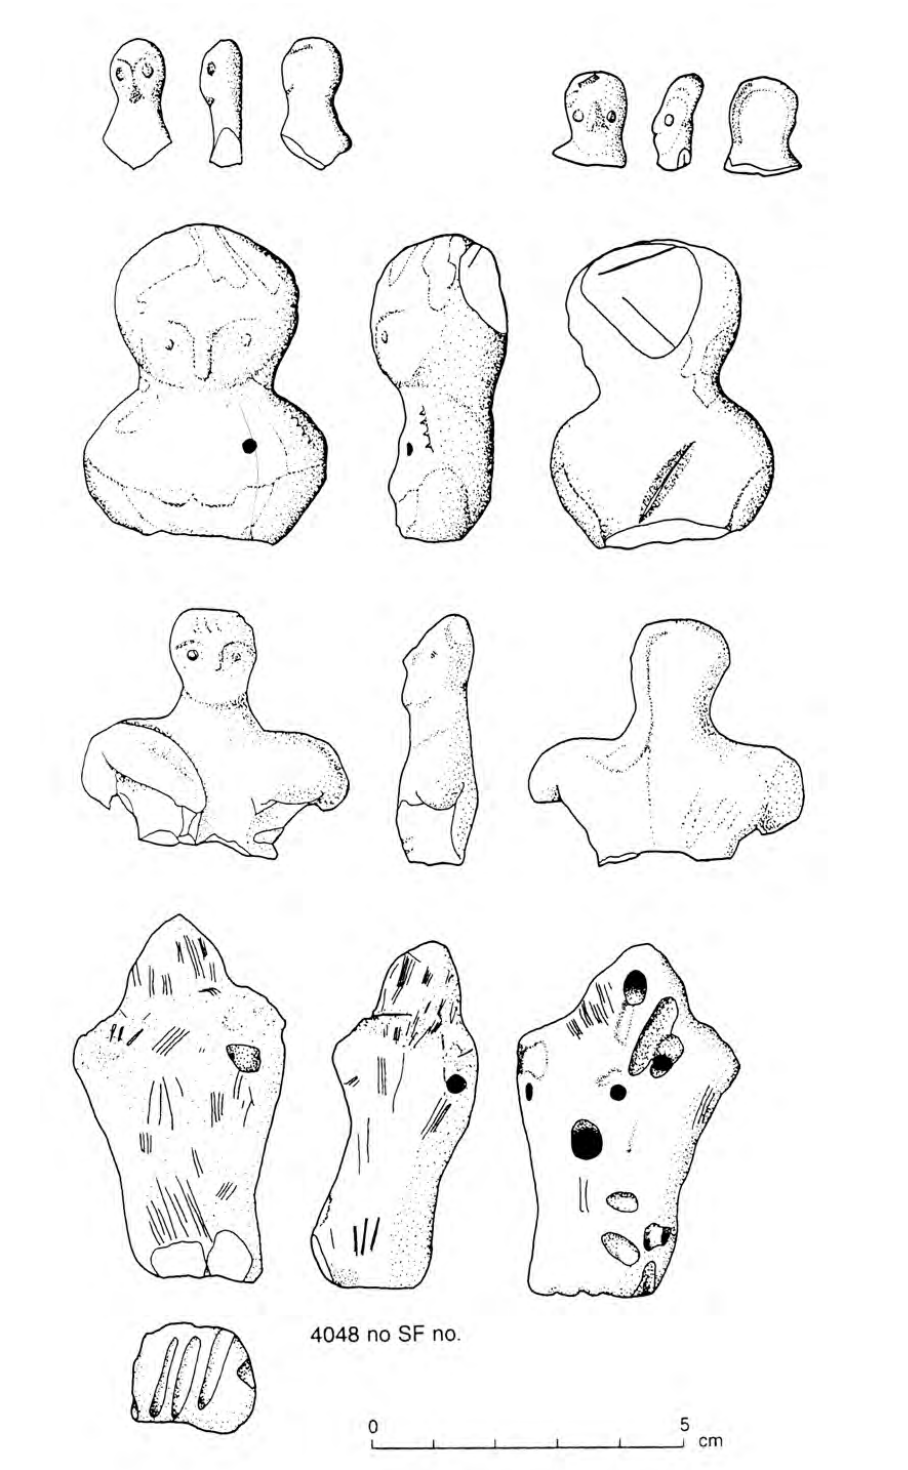 drawings of several busts from various angles.